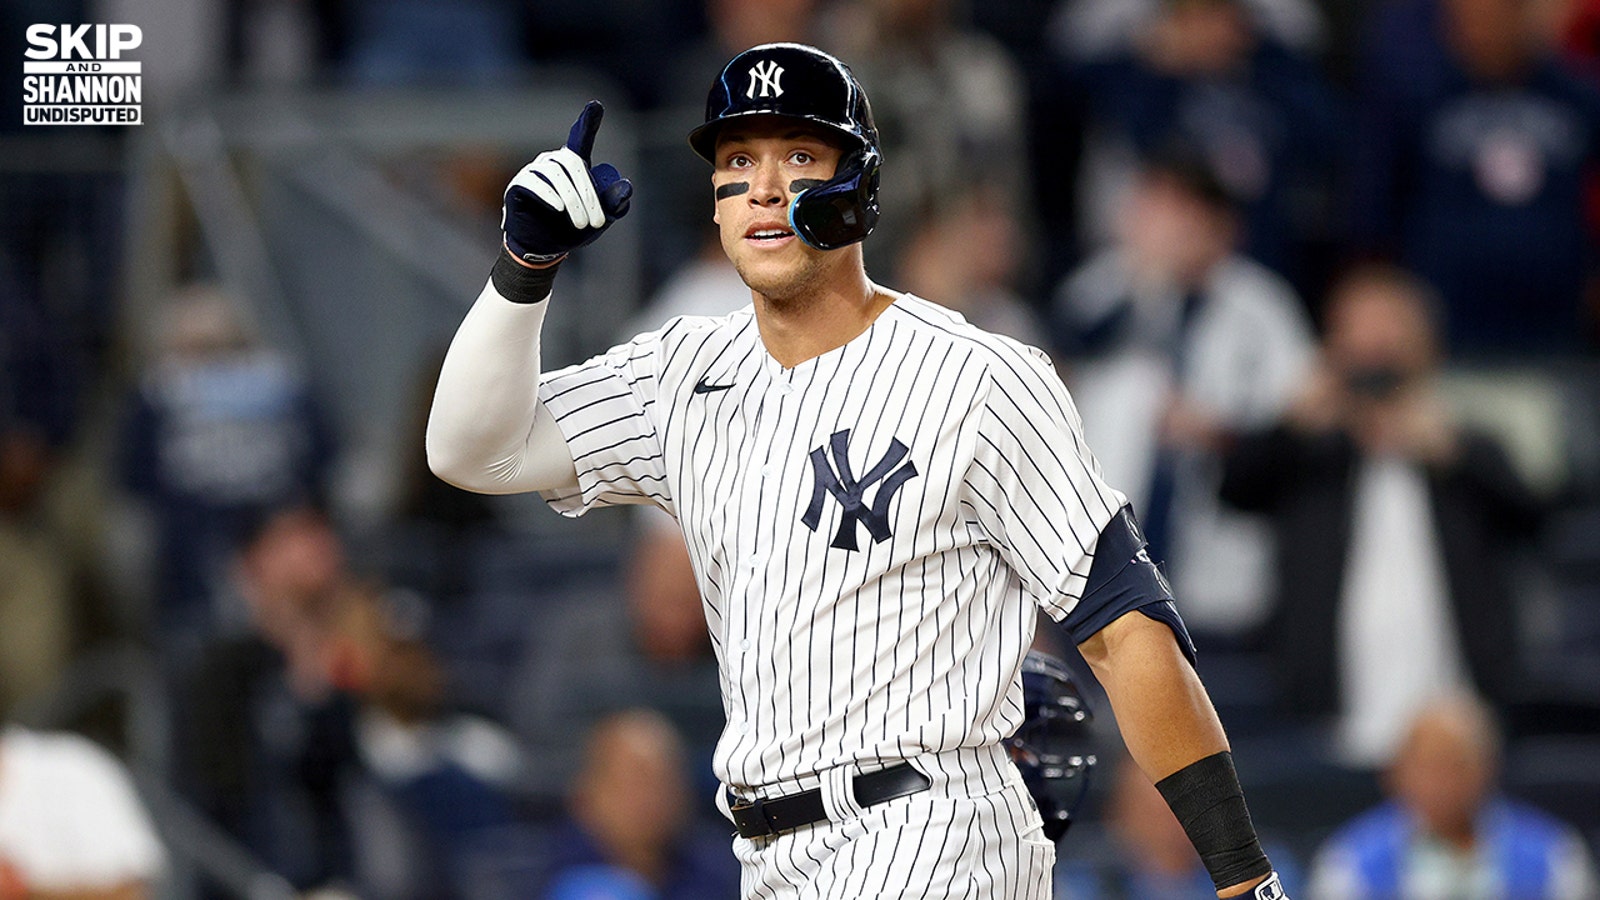 Aaron Judge's greatness is more than just a home run record